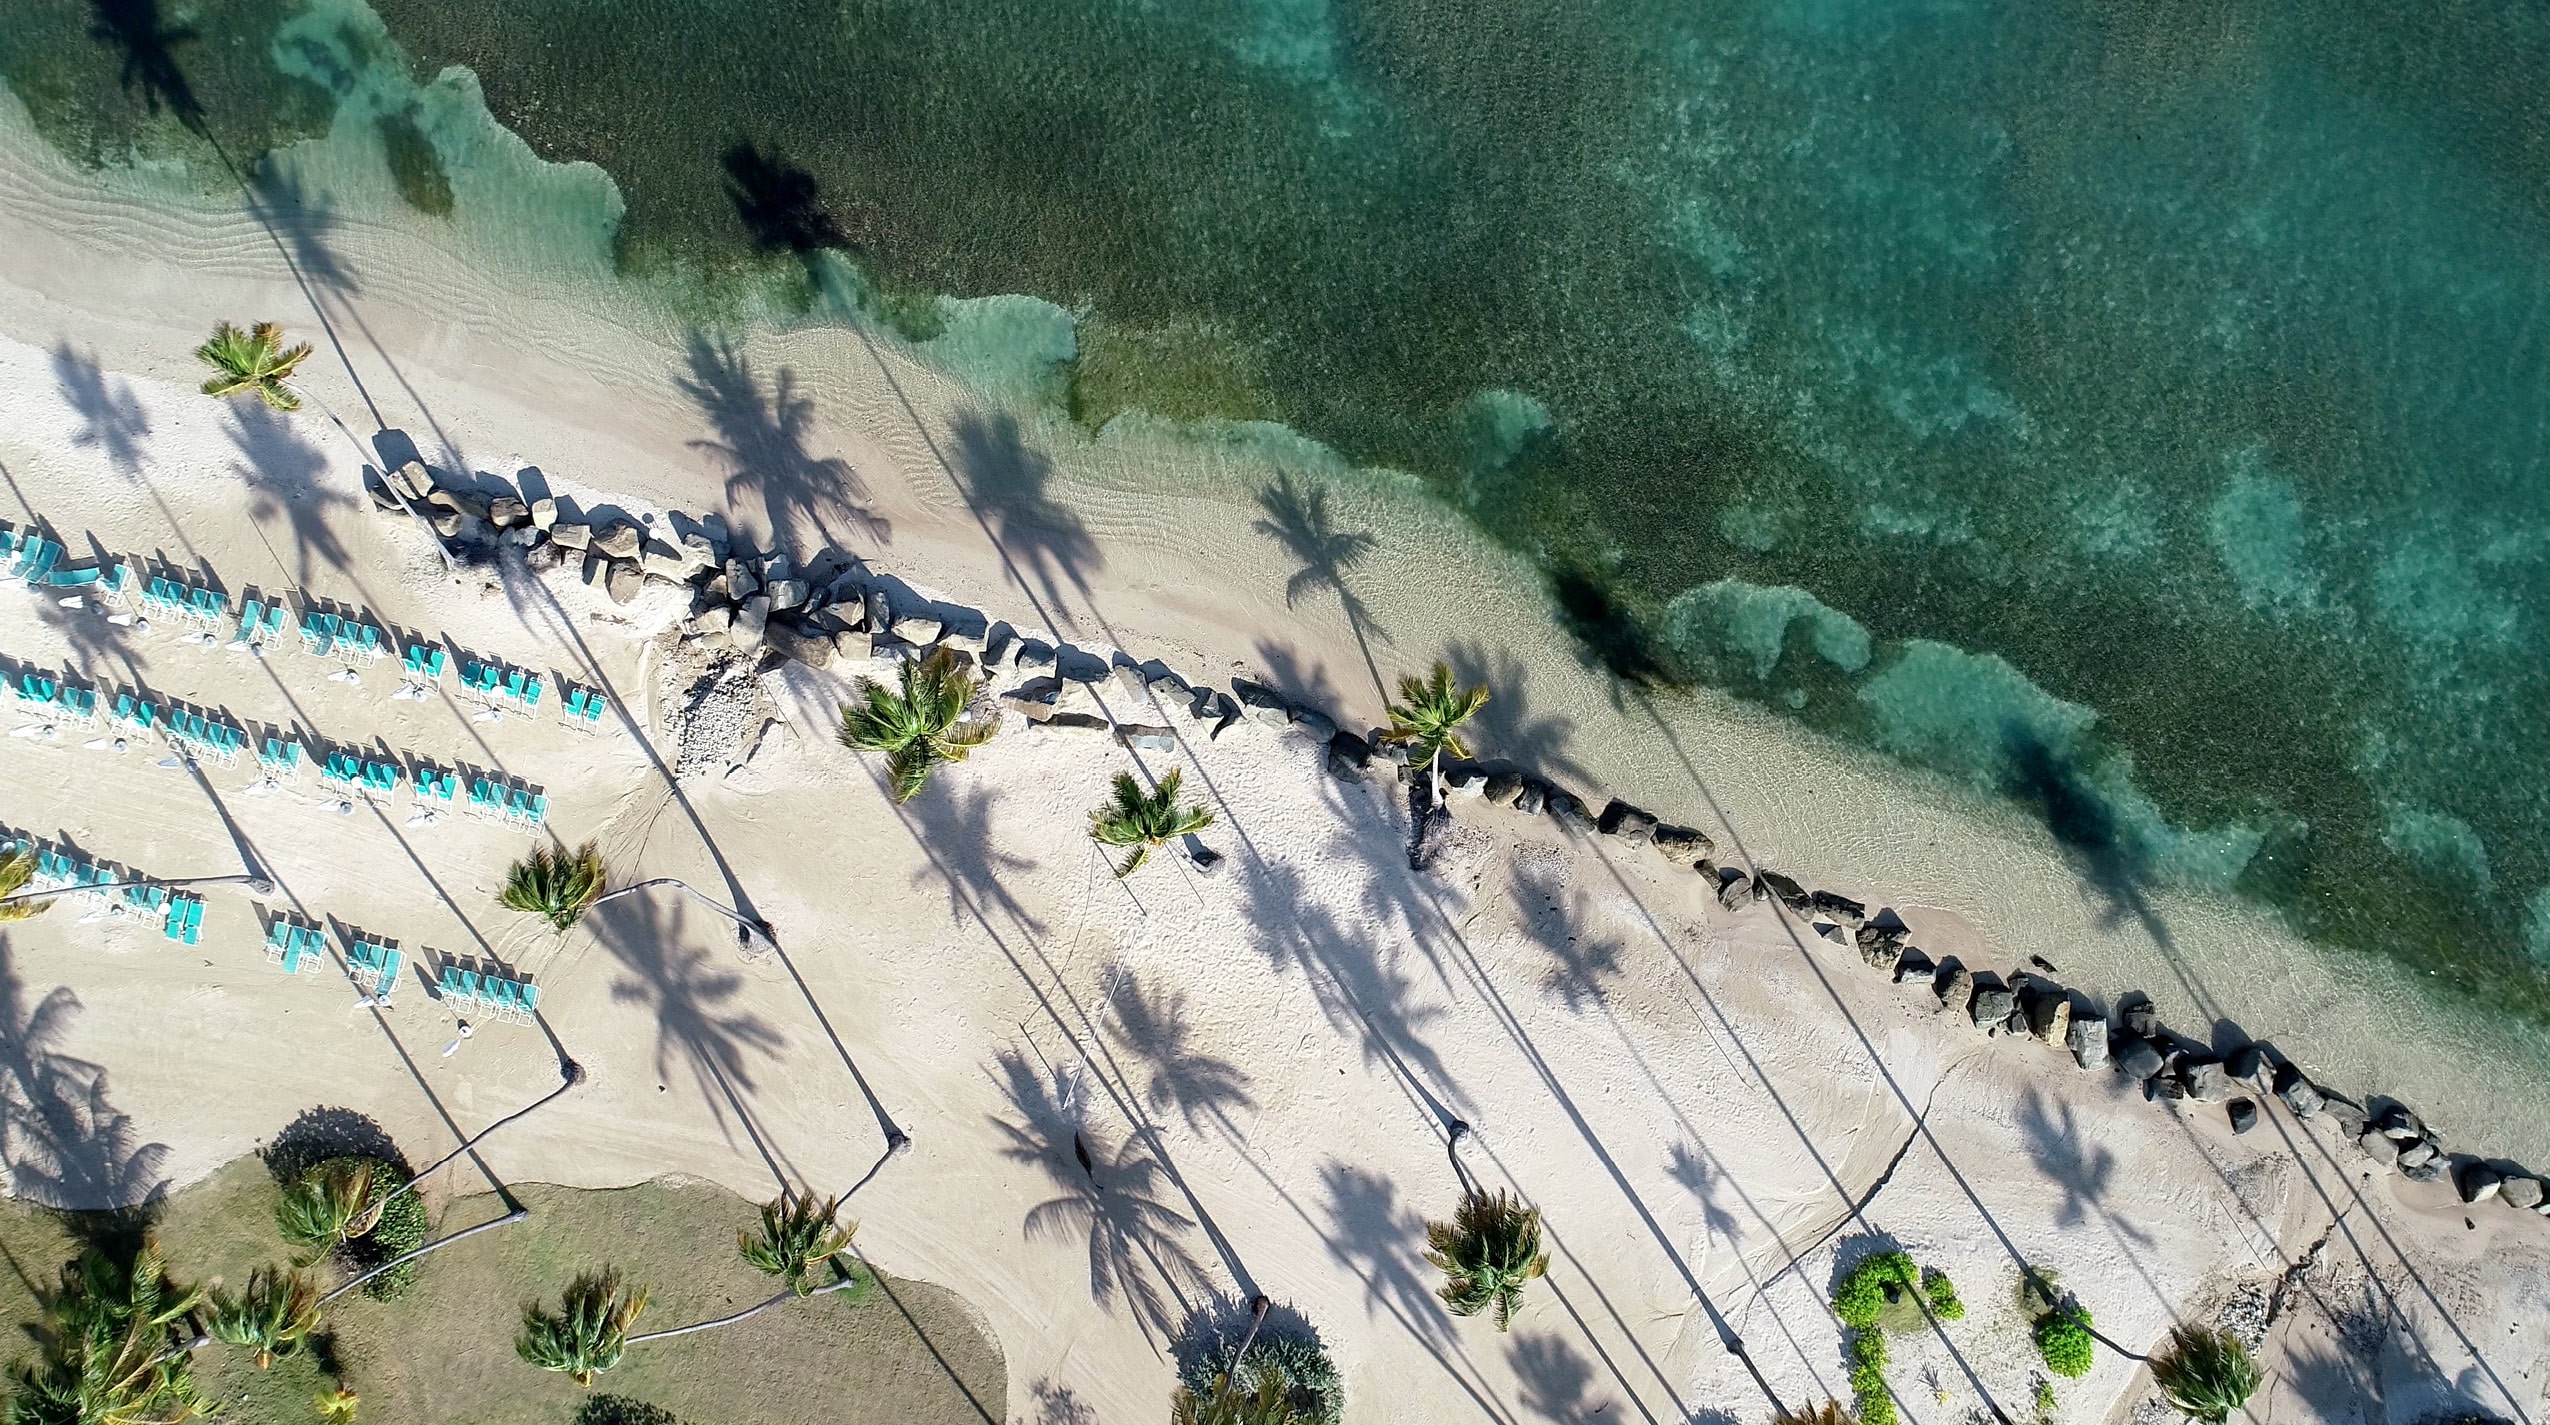 An aerial view of The Grand Reserve's private beach with crystal-clear waters, neatly arranged loungers under palm trees reflecting the resort's serene beachside luxury.